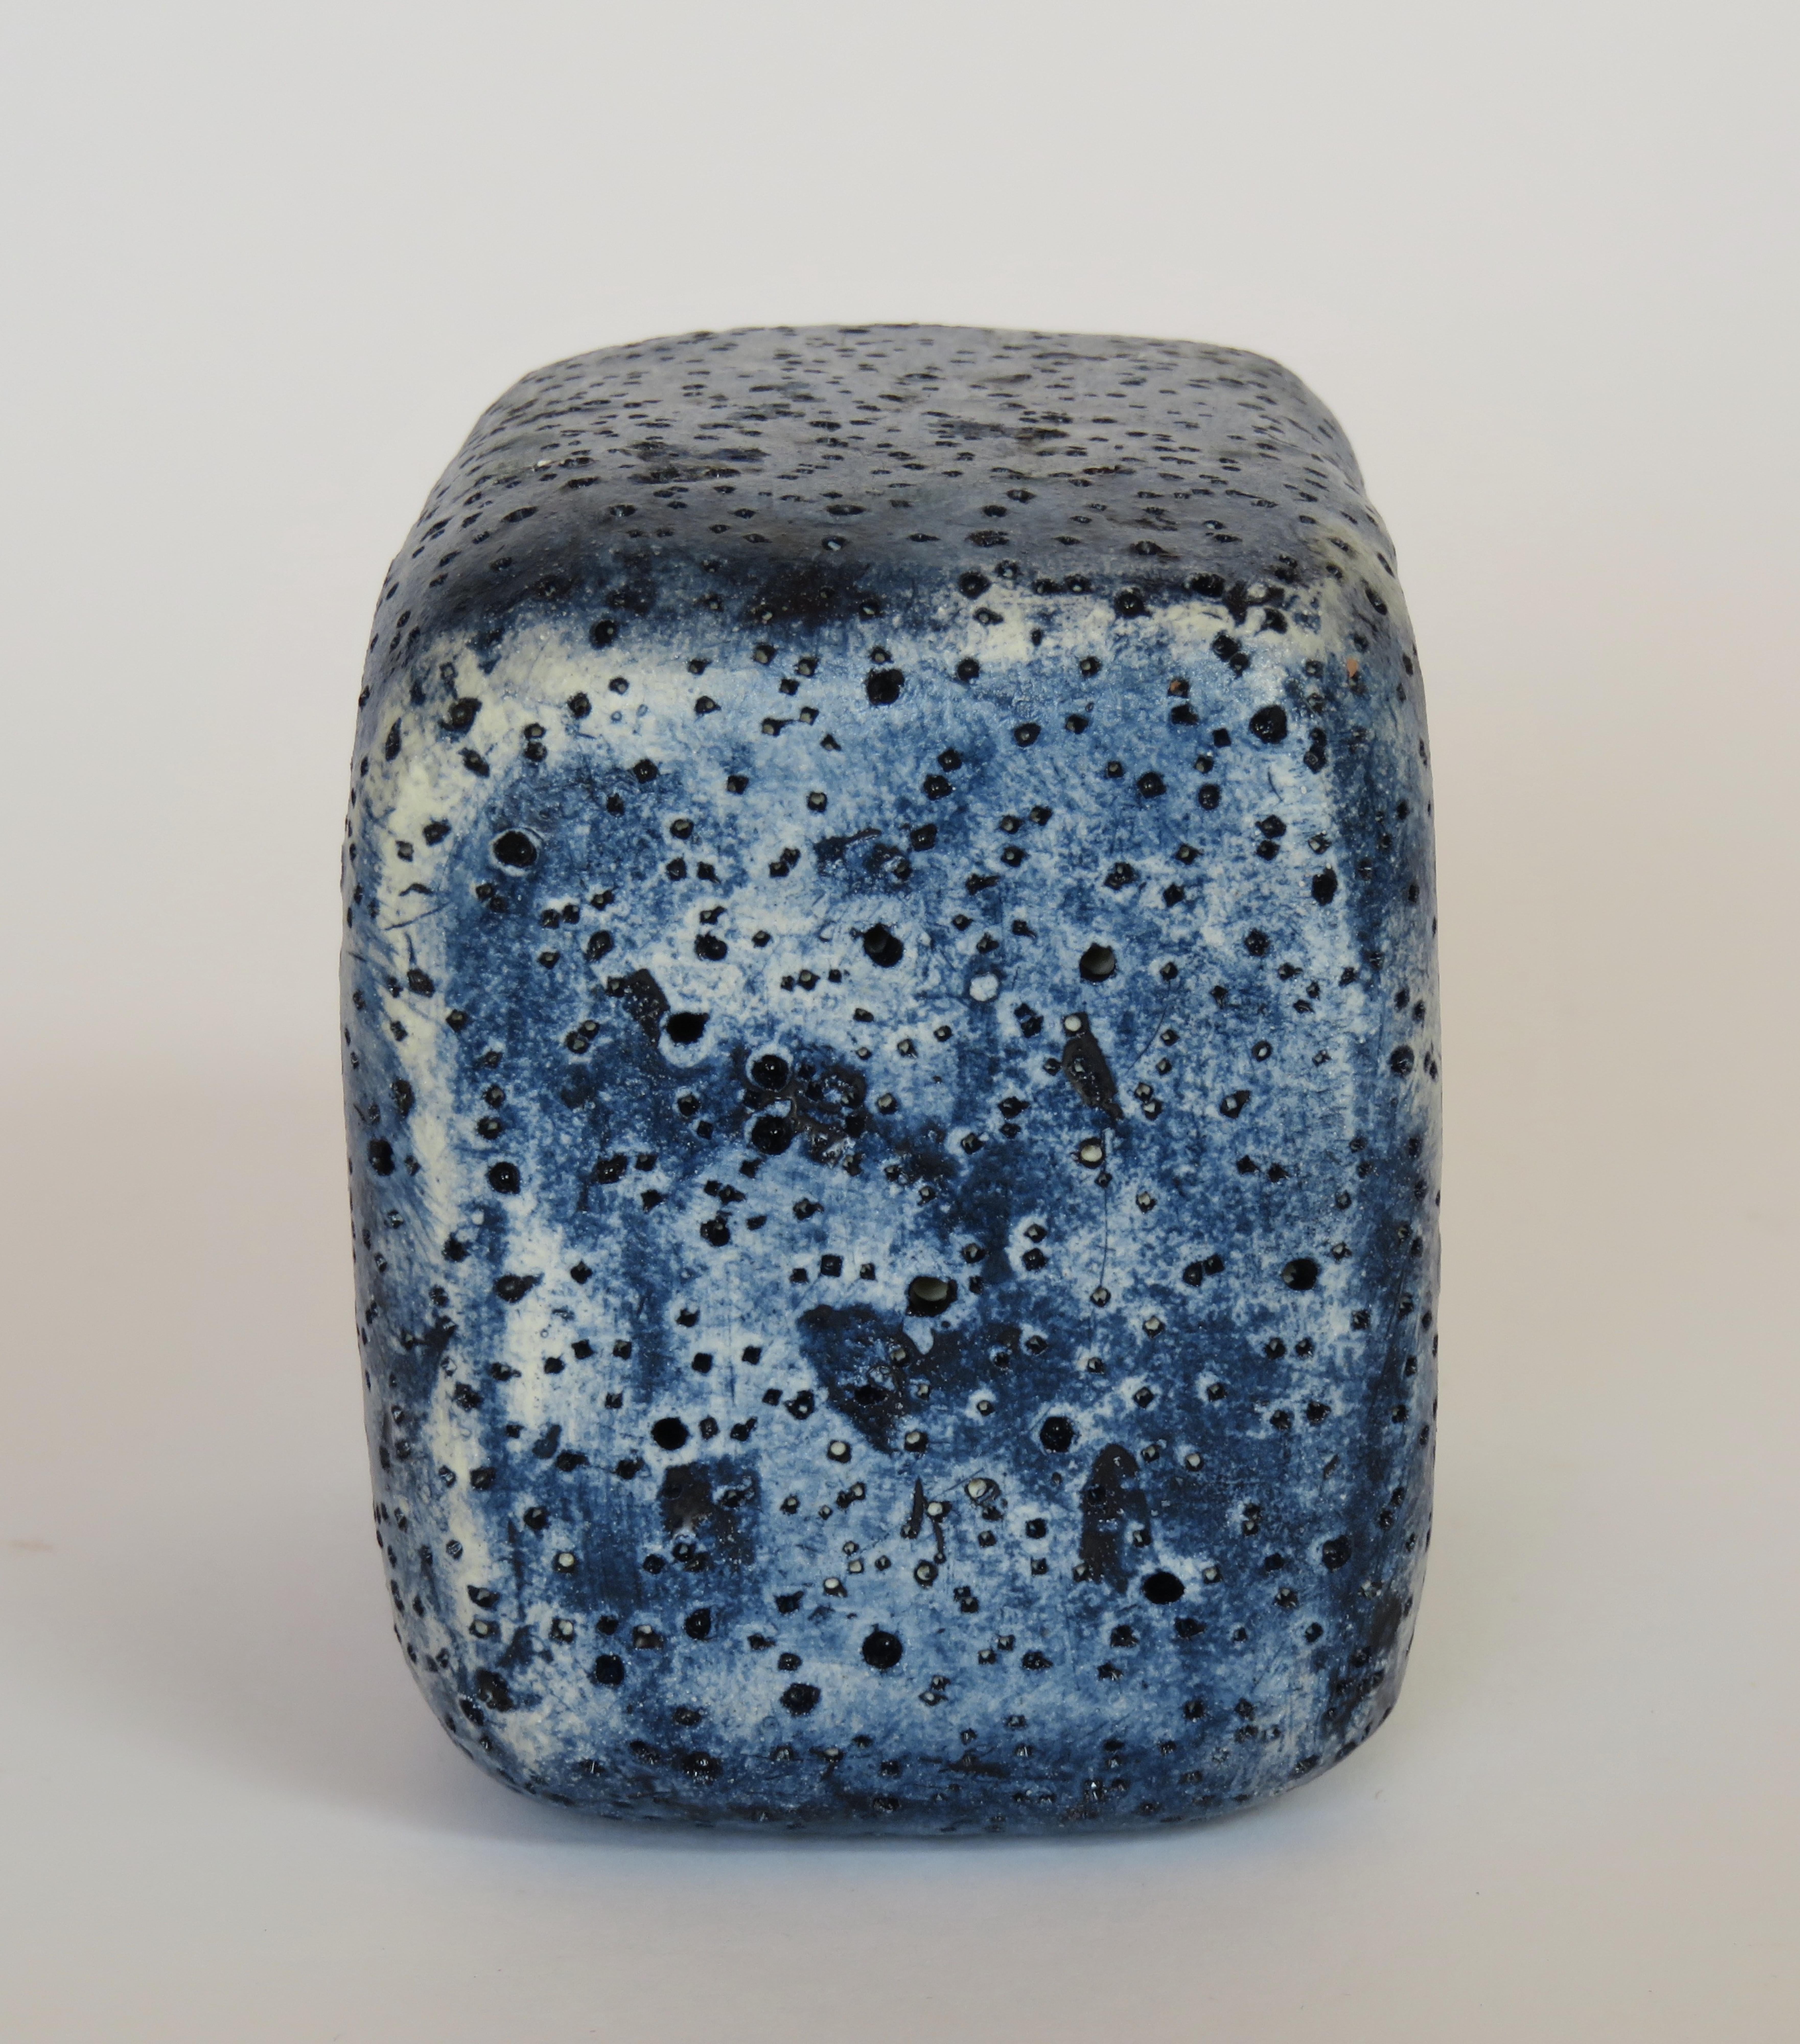 Stoneware Hand Textured Ceramic Sculpture, Oblong Cube with Oval Opening in Deep Blue Wash